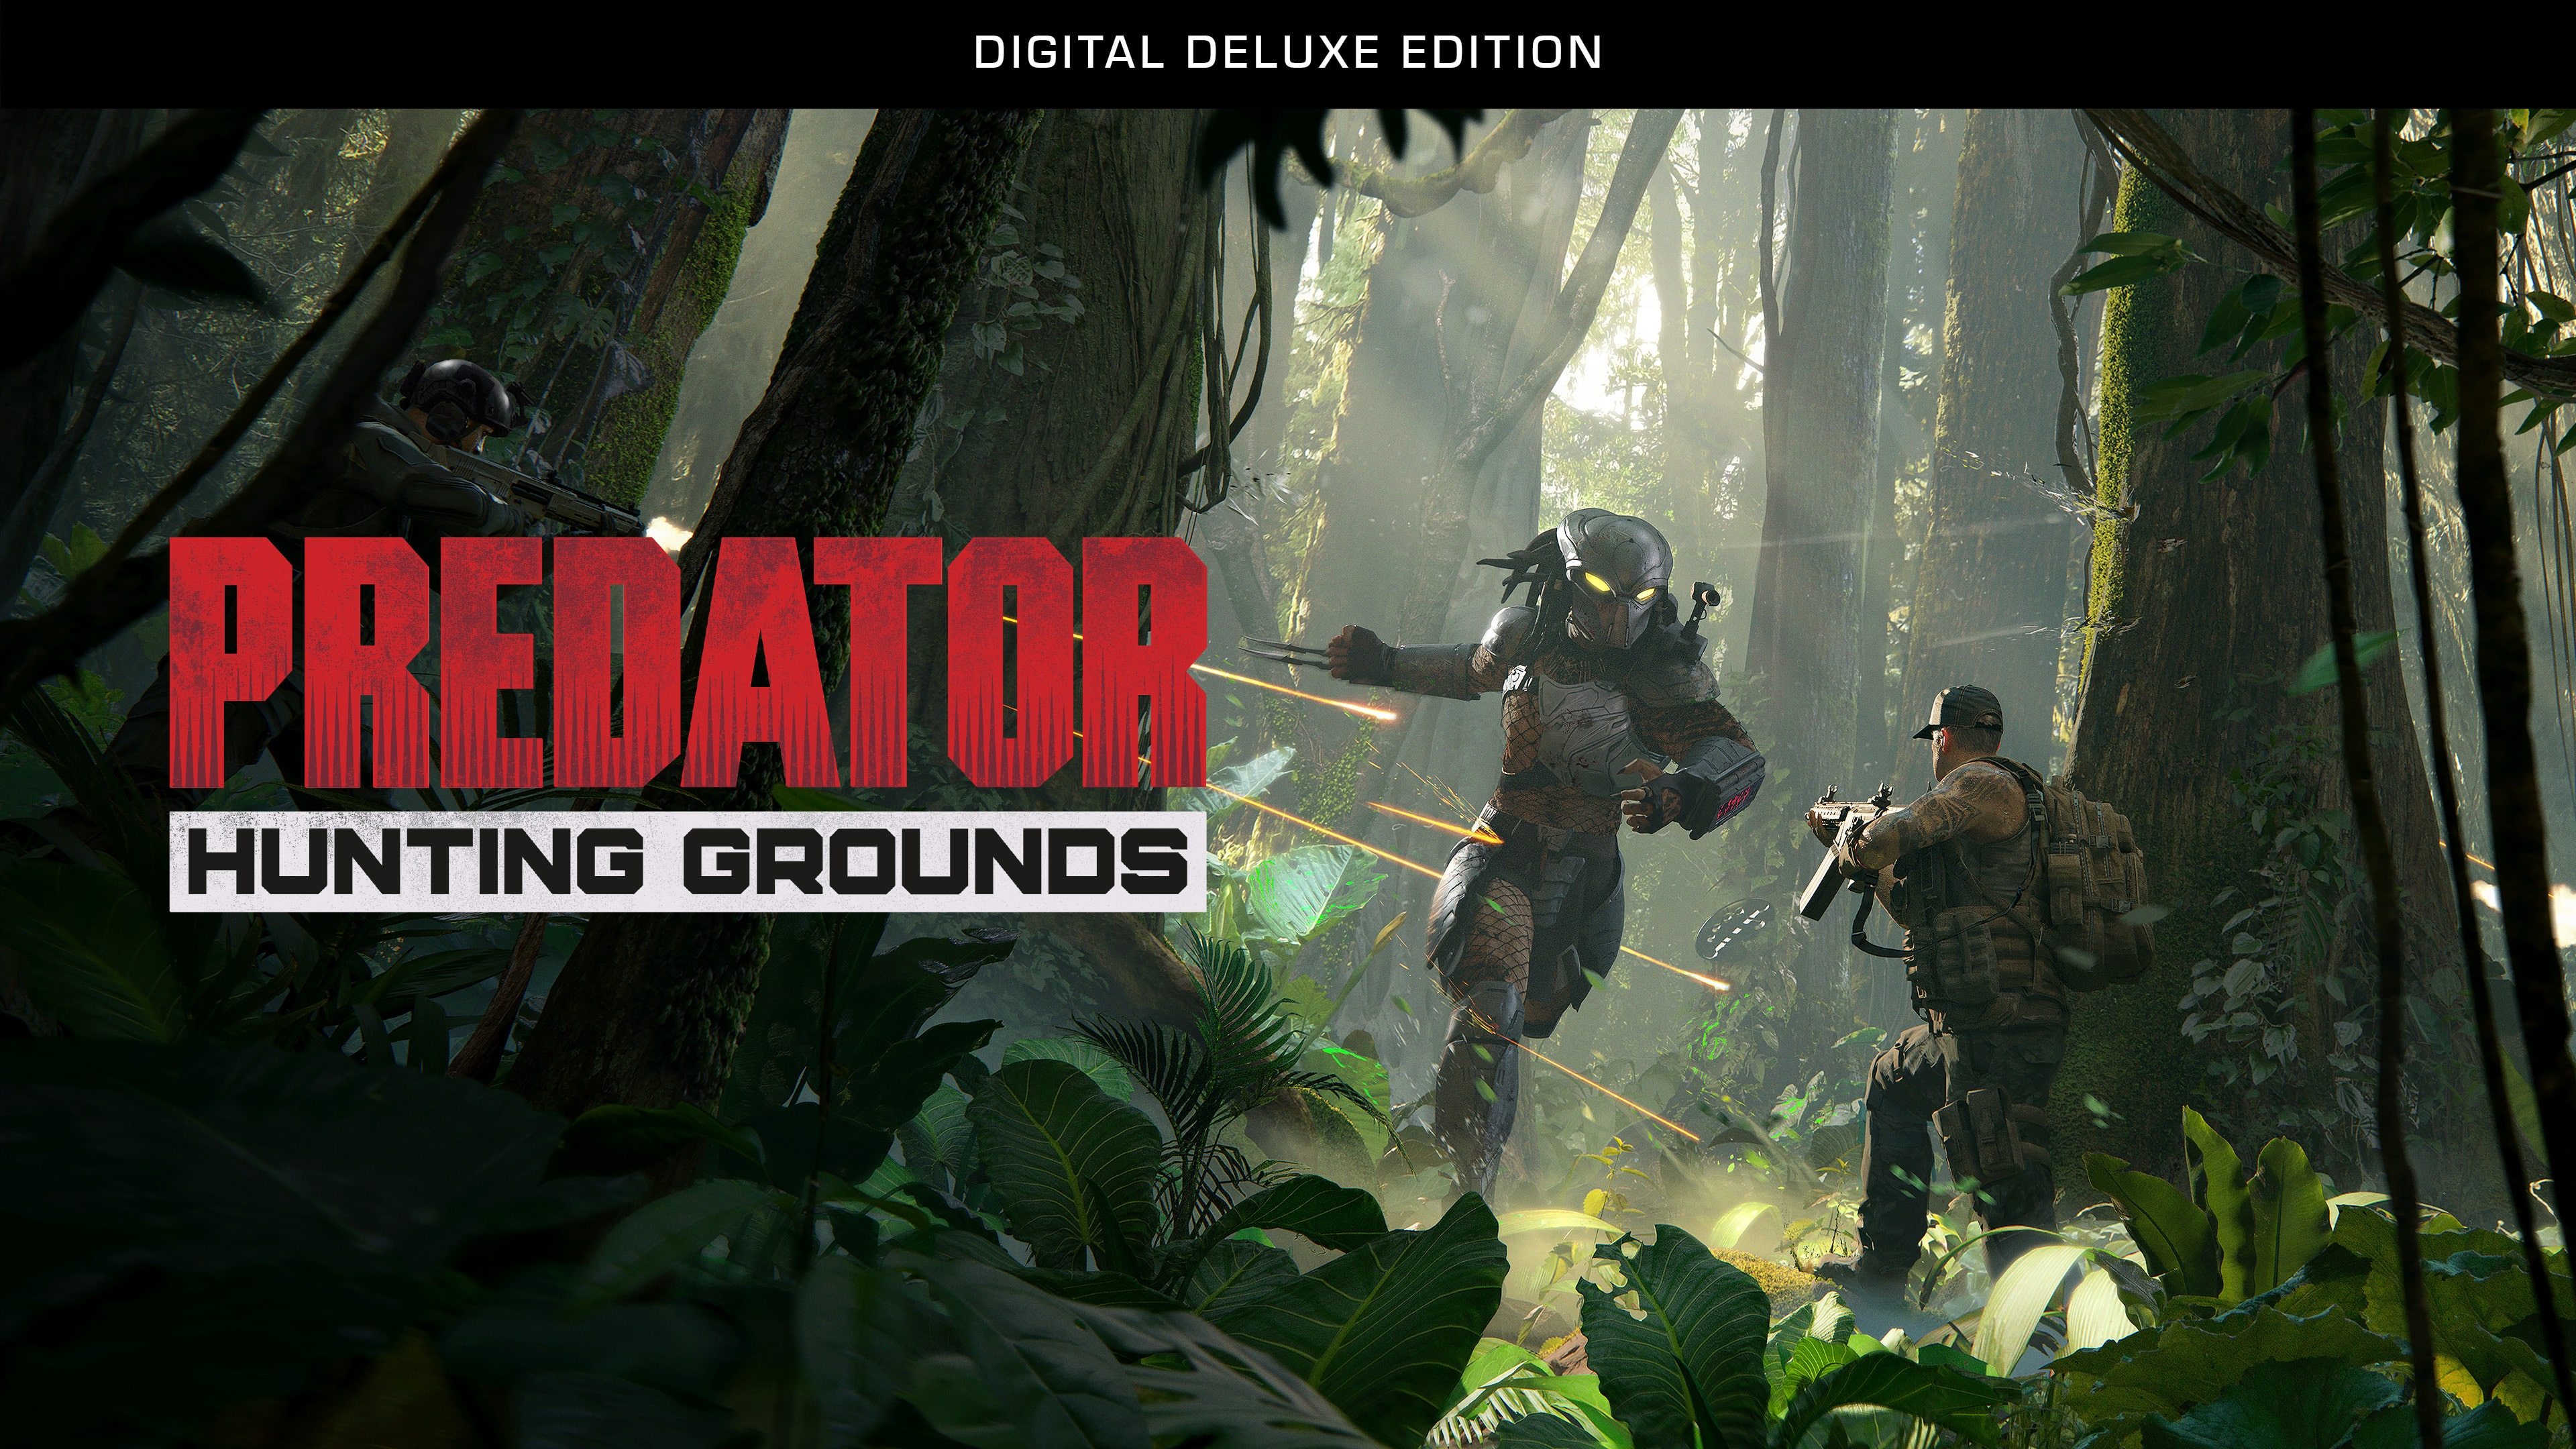 Predator: Hunting Grounds Digital Deluxe Edition (English, Korean, Traditional Chinese)